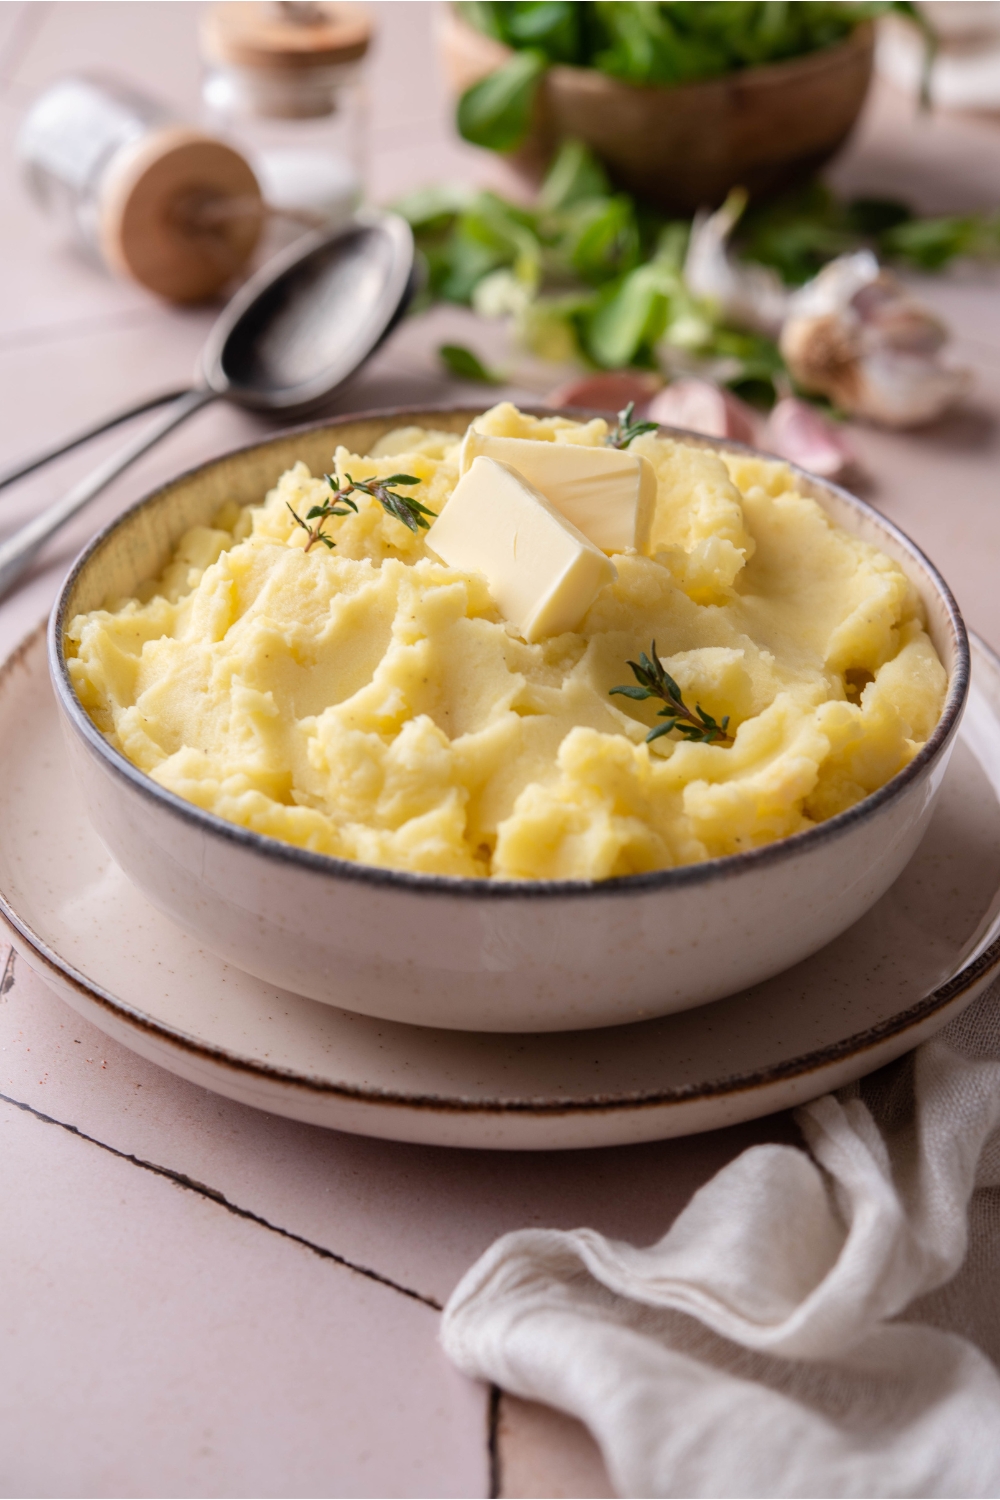 A bowl of mashed potatoes with two tabs of butter and fresh green herbs garnished on top.